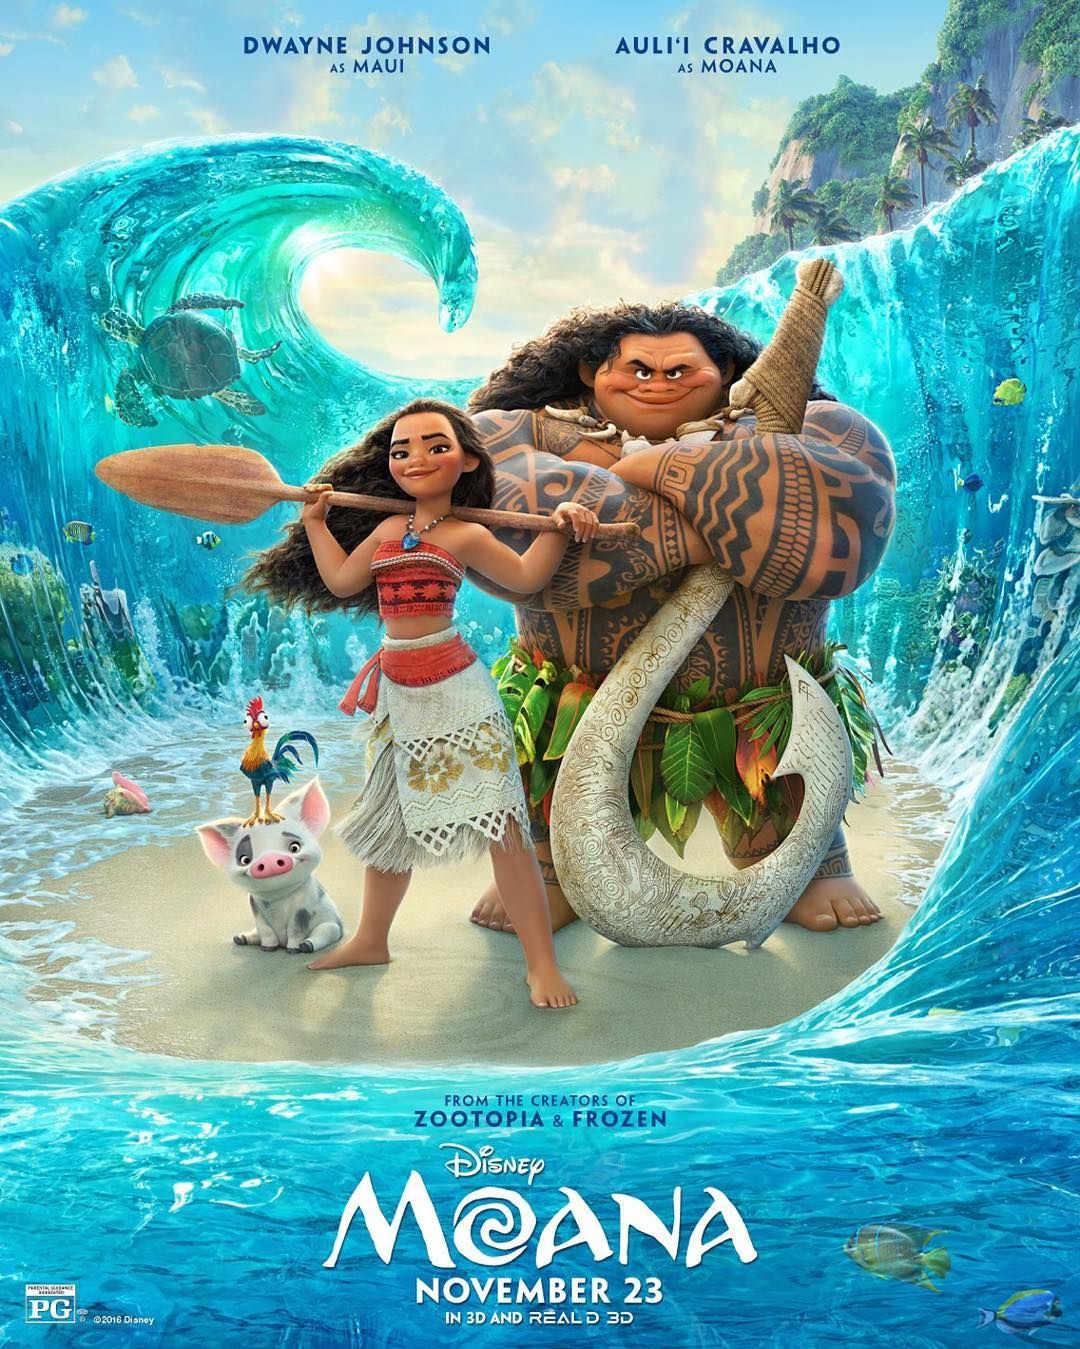 Official poster for Moana